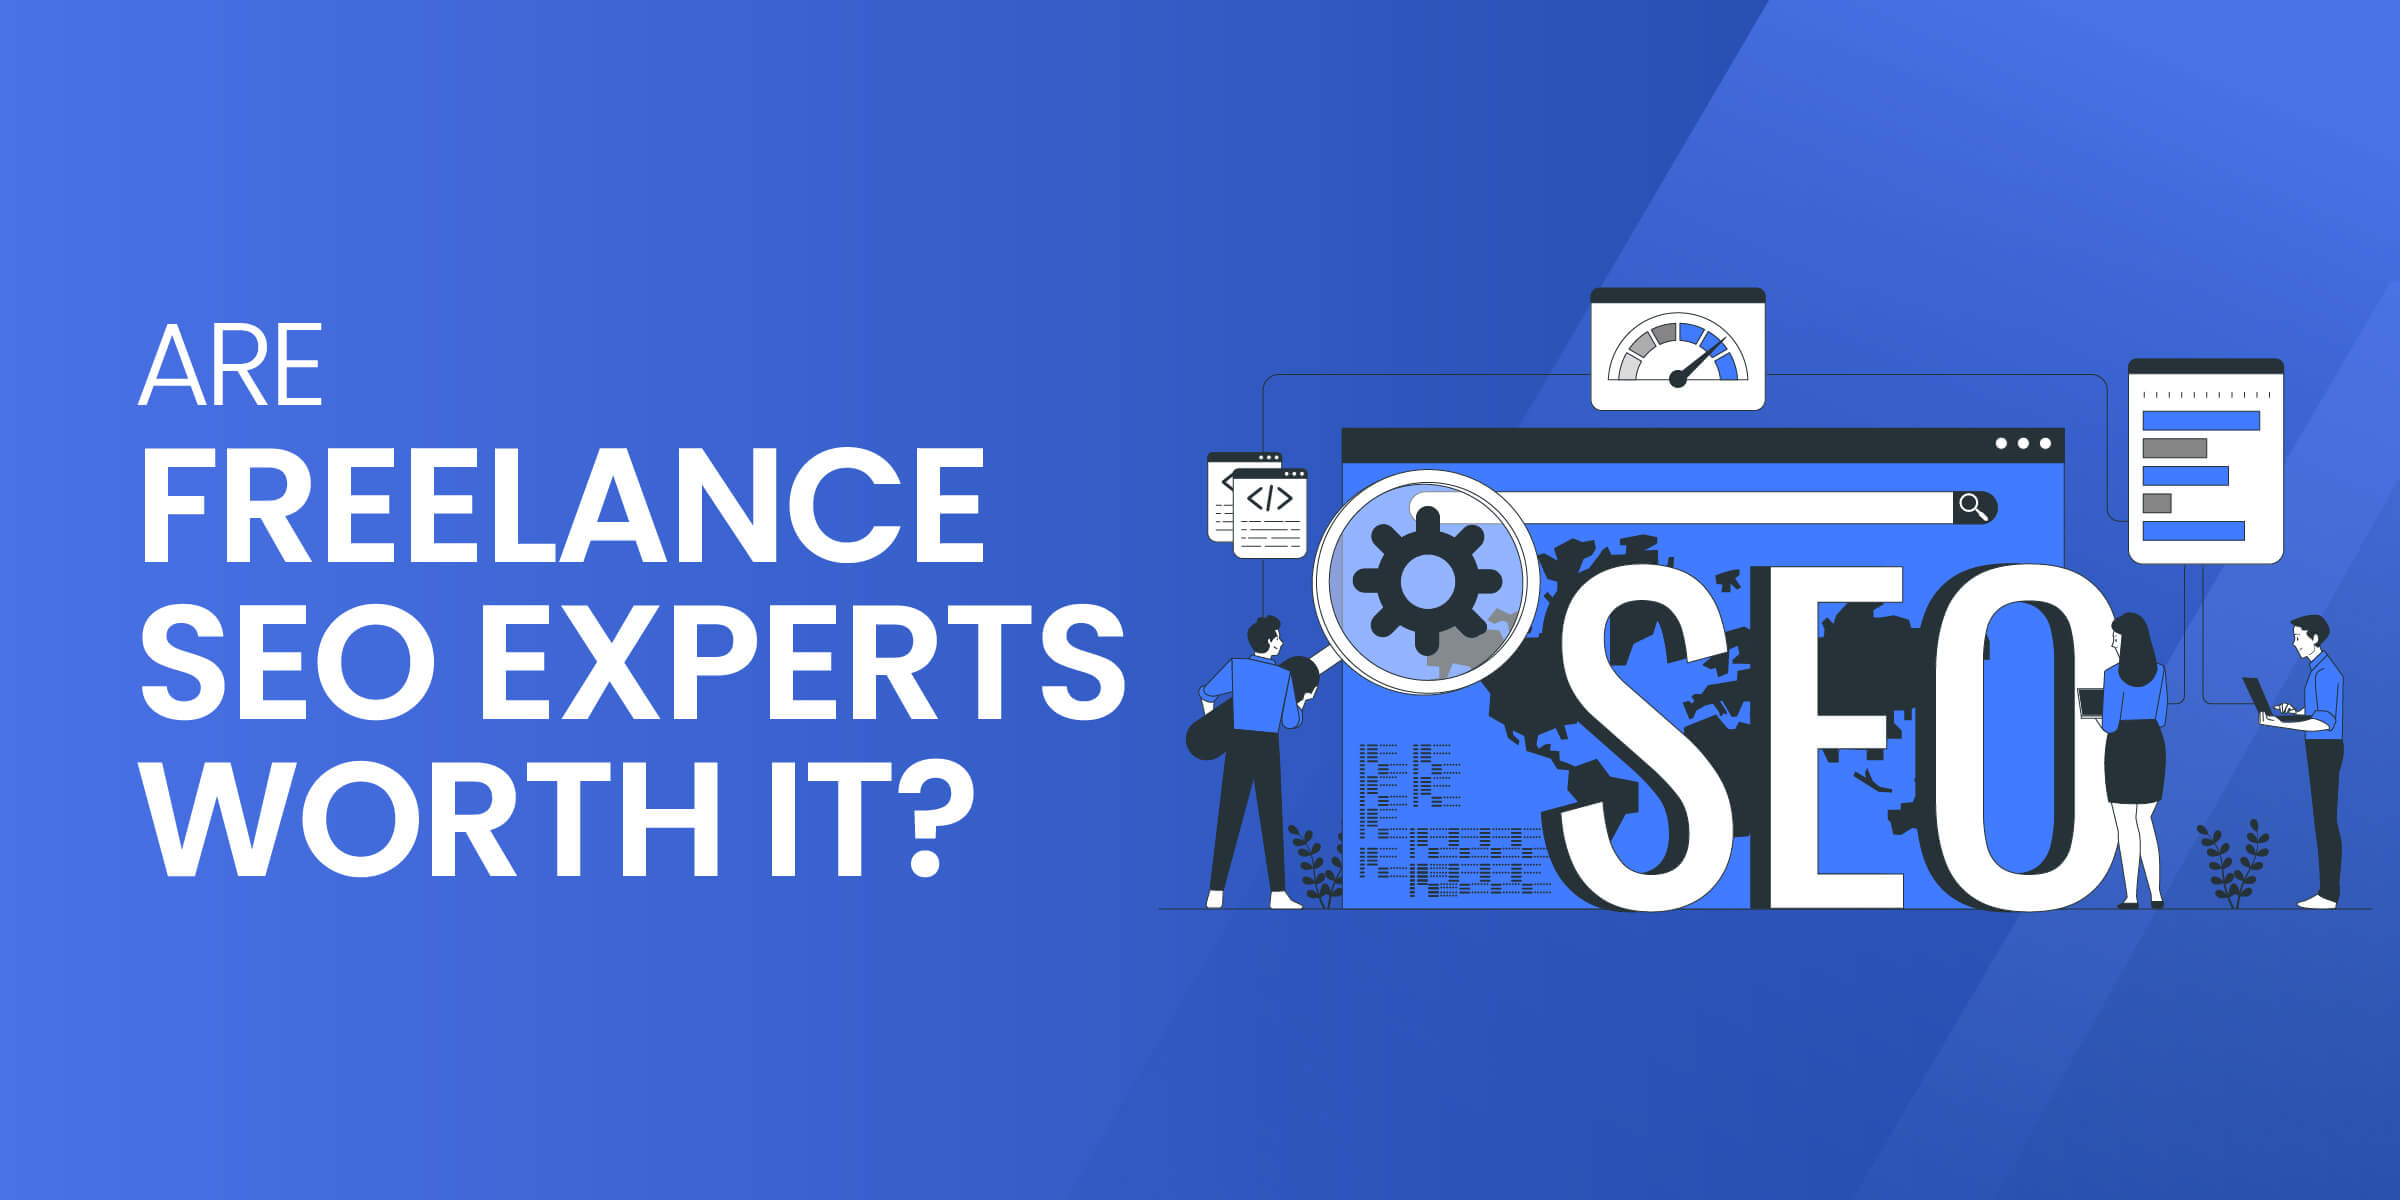 Are Freelance SEO Experts Worth It